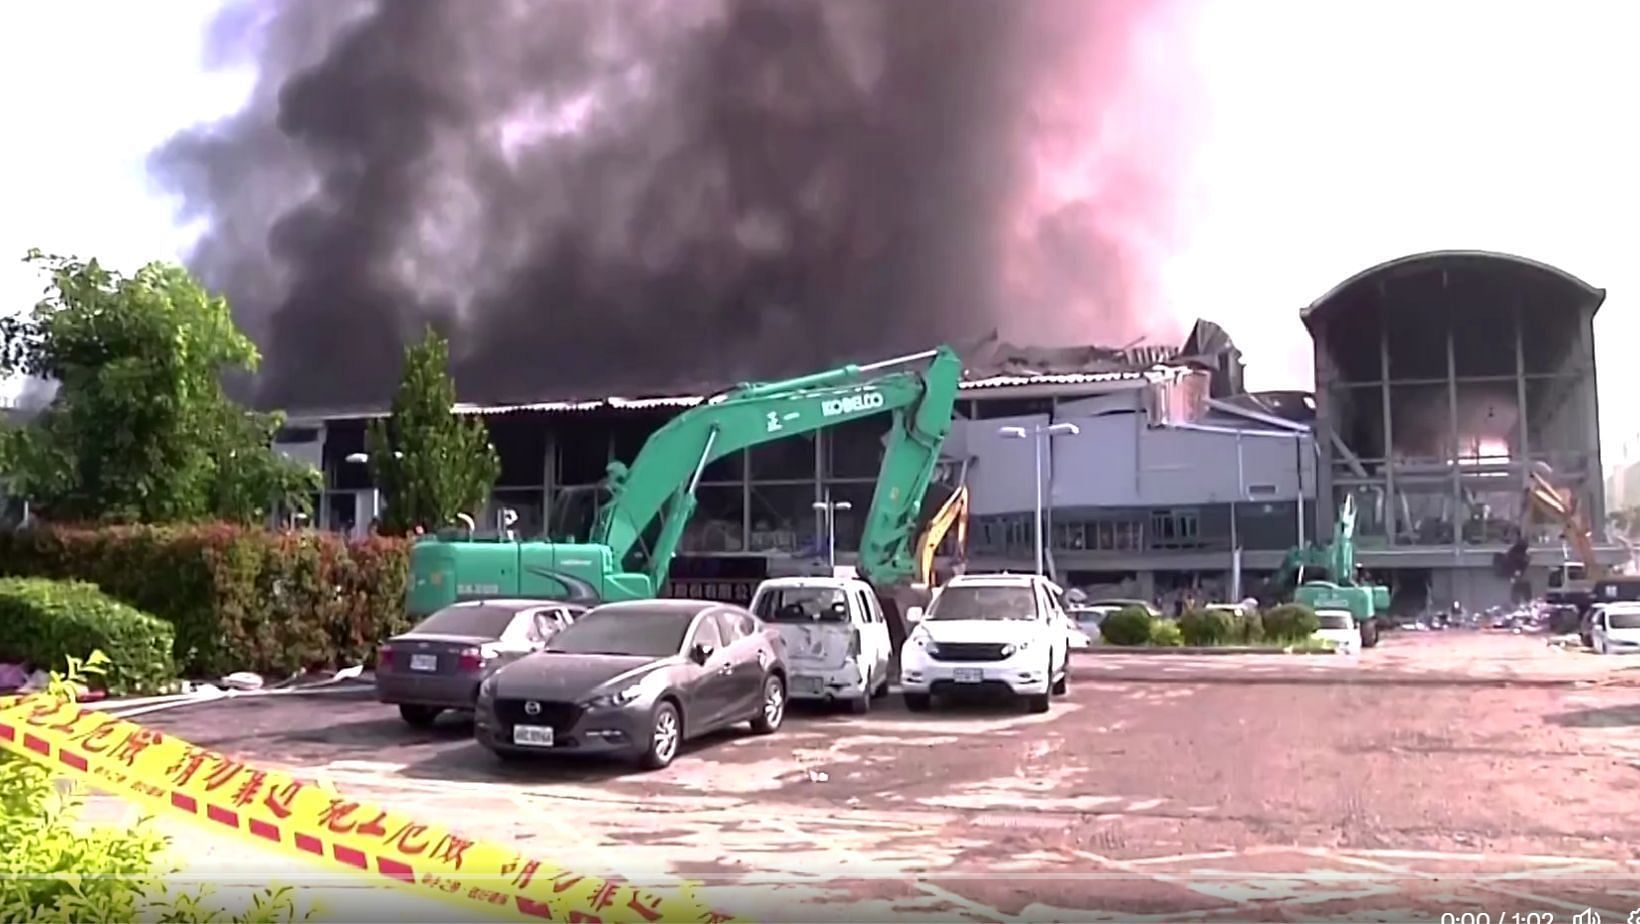 The Golf ball factory fire at Taiwan (Image via Reuters/Twitter)